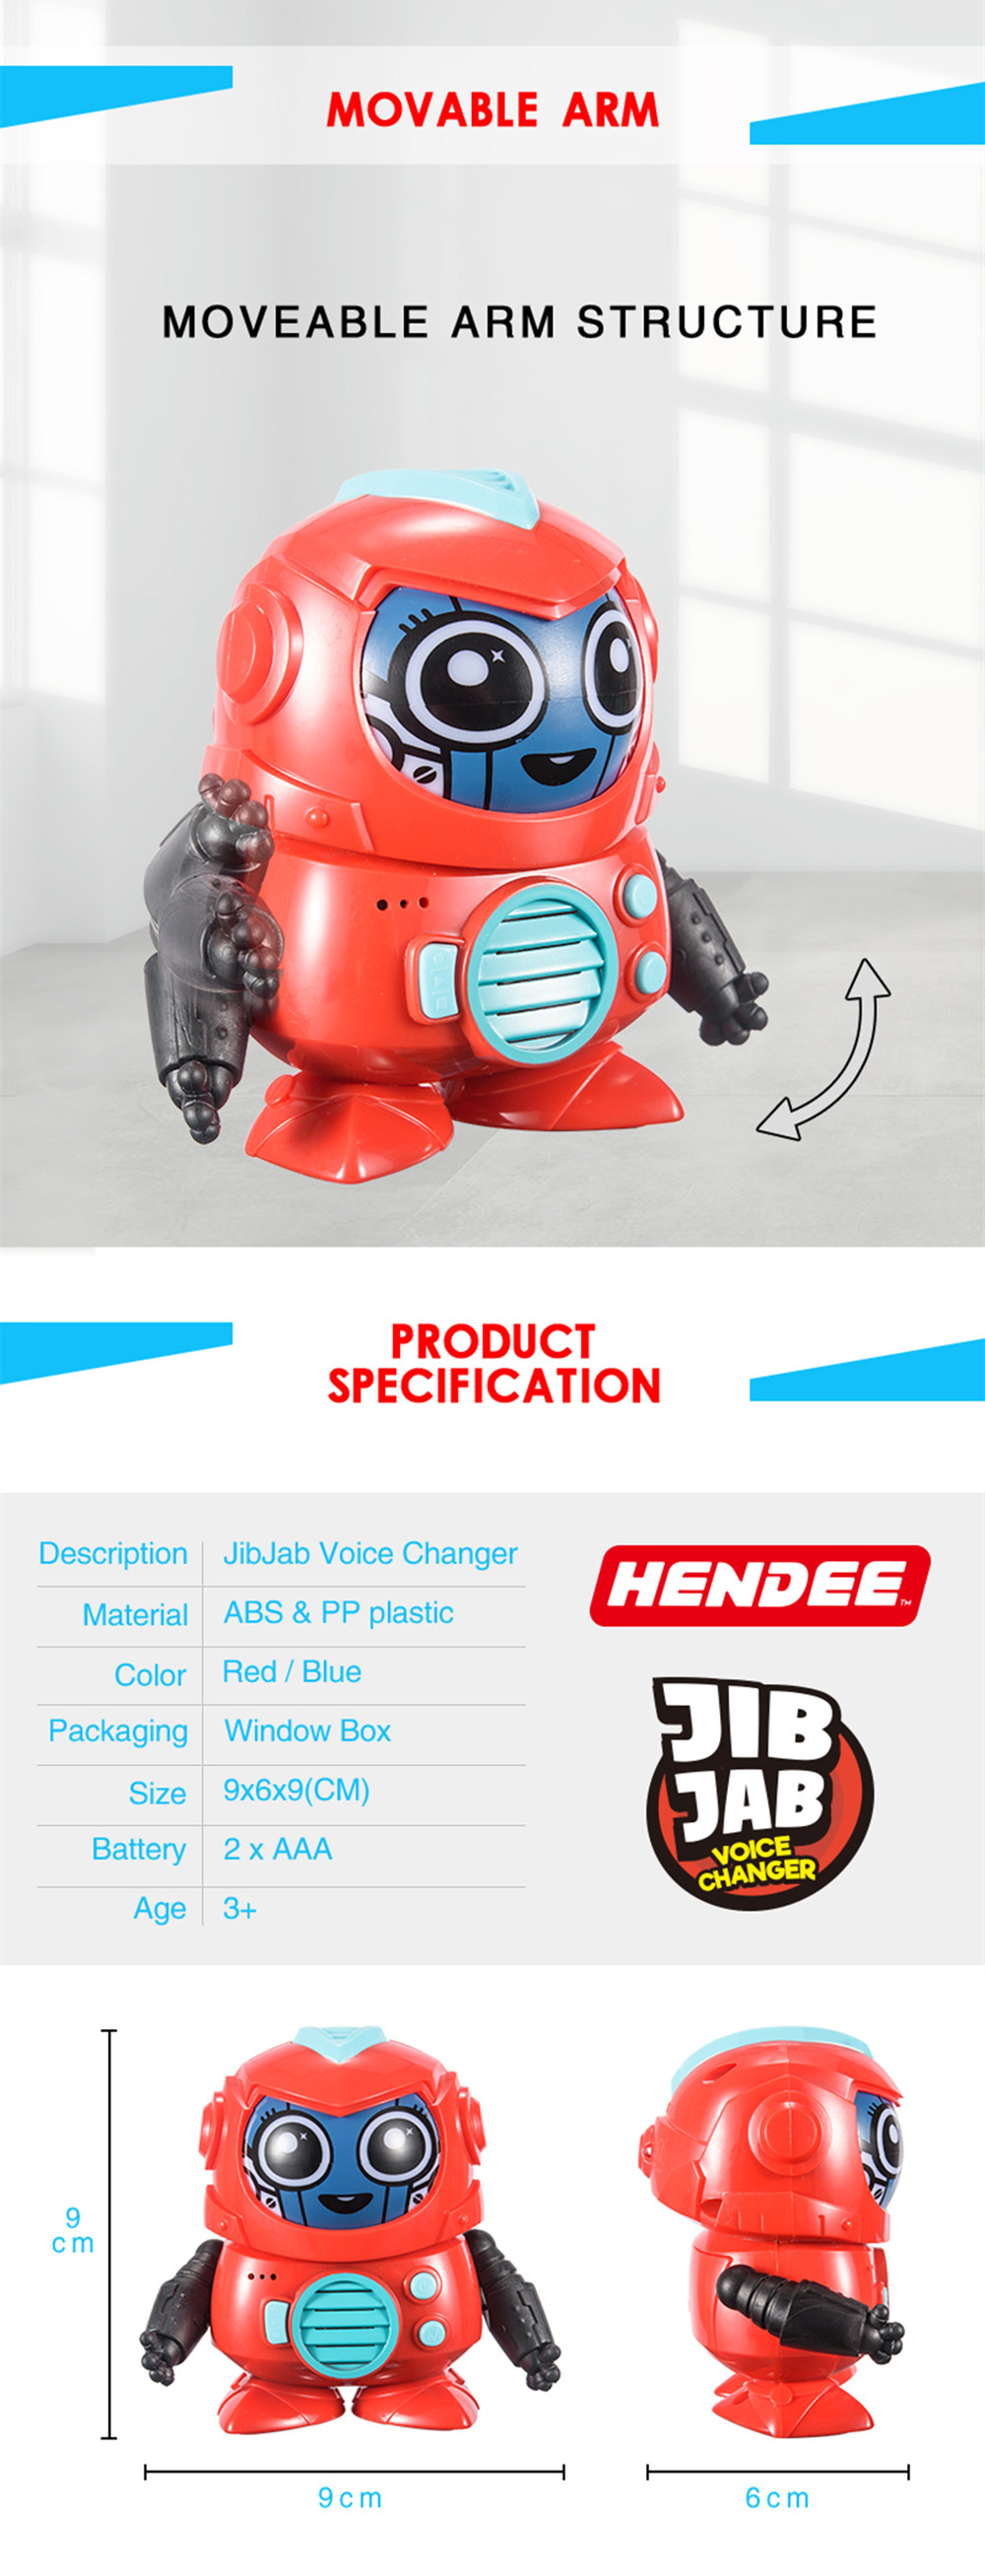 MOFUN-1902-Face-Changing-Voice-Record-Tone-Change-Interact-RC-Robot-Toy-1647981-3